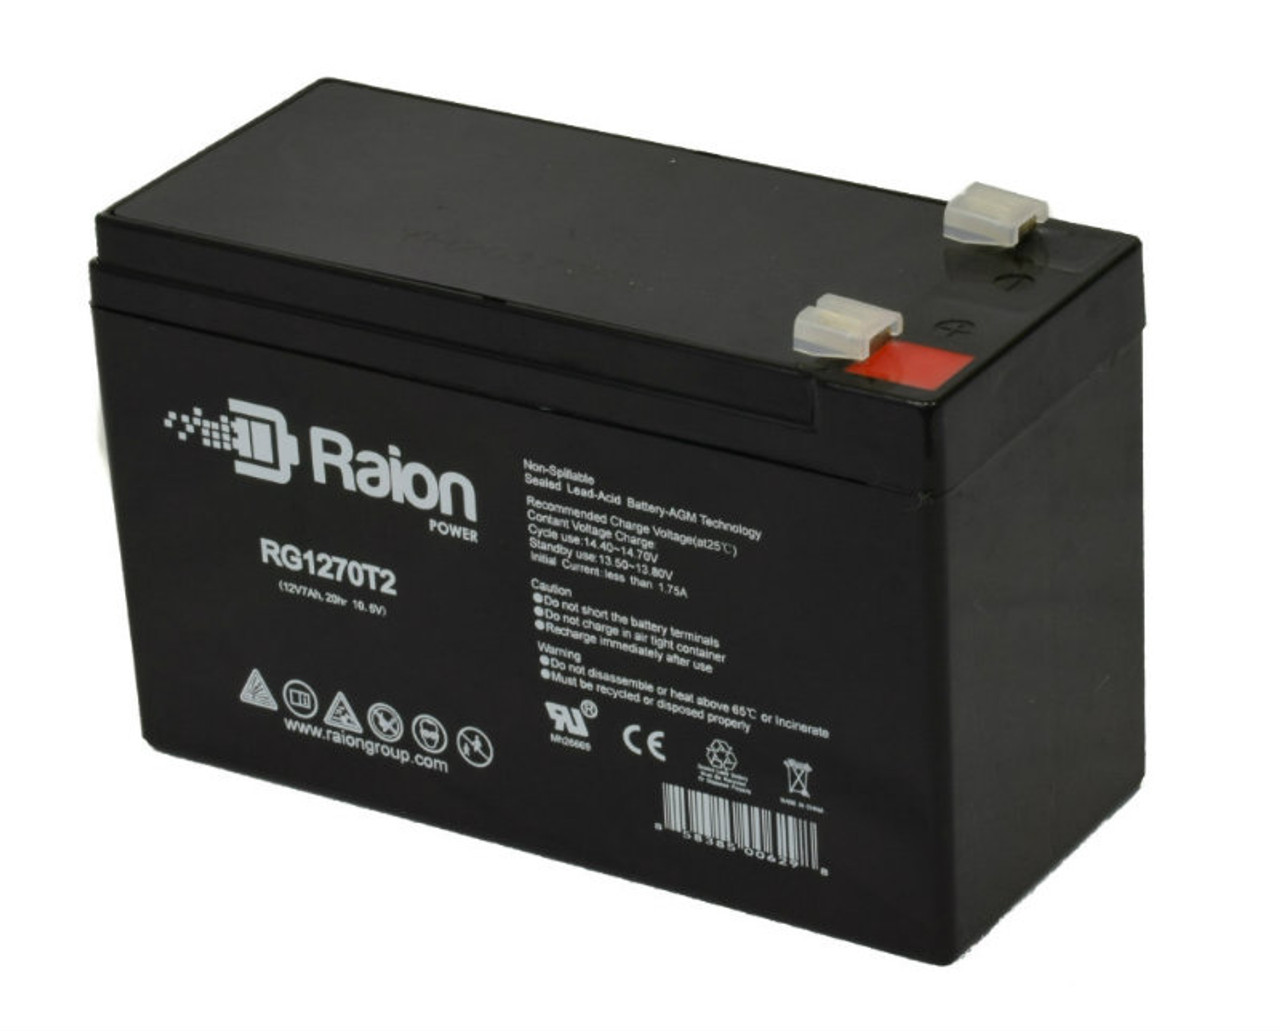 Raion Power RG1270T2 12V 7Ah Rechargeable Battery for Leoch LPC12-7.2